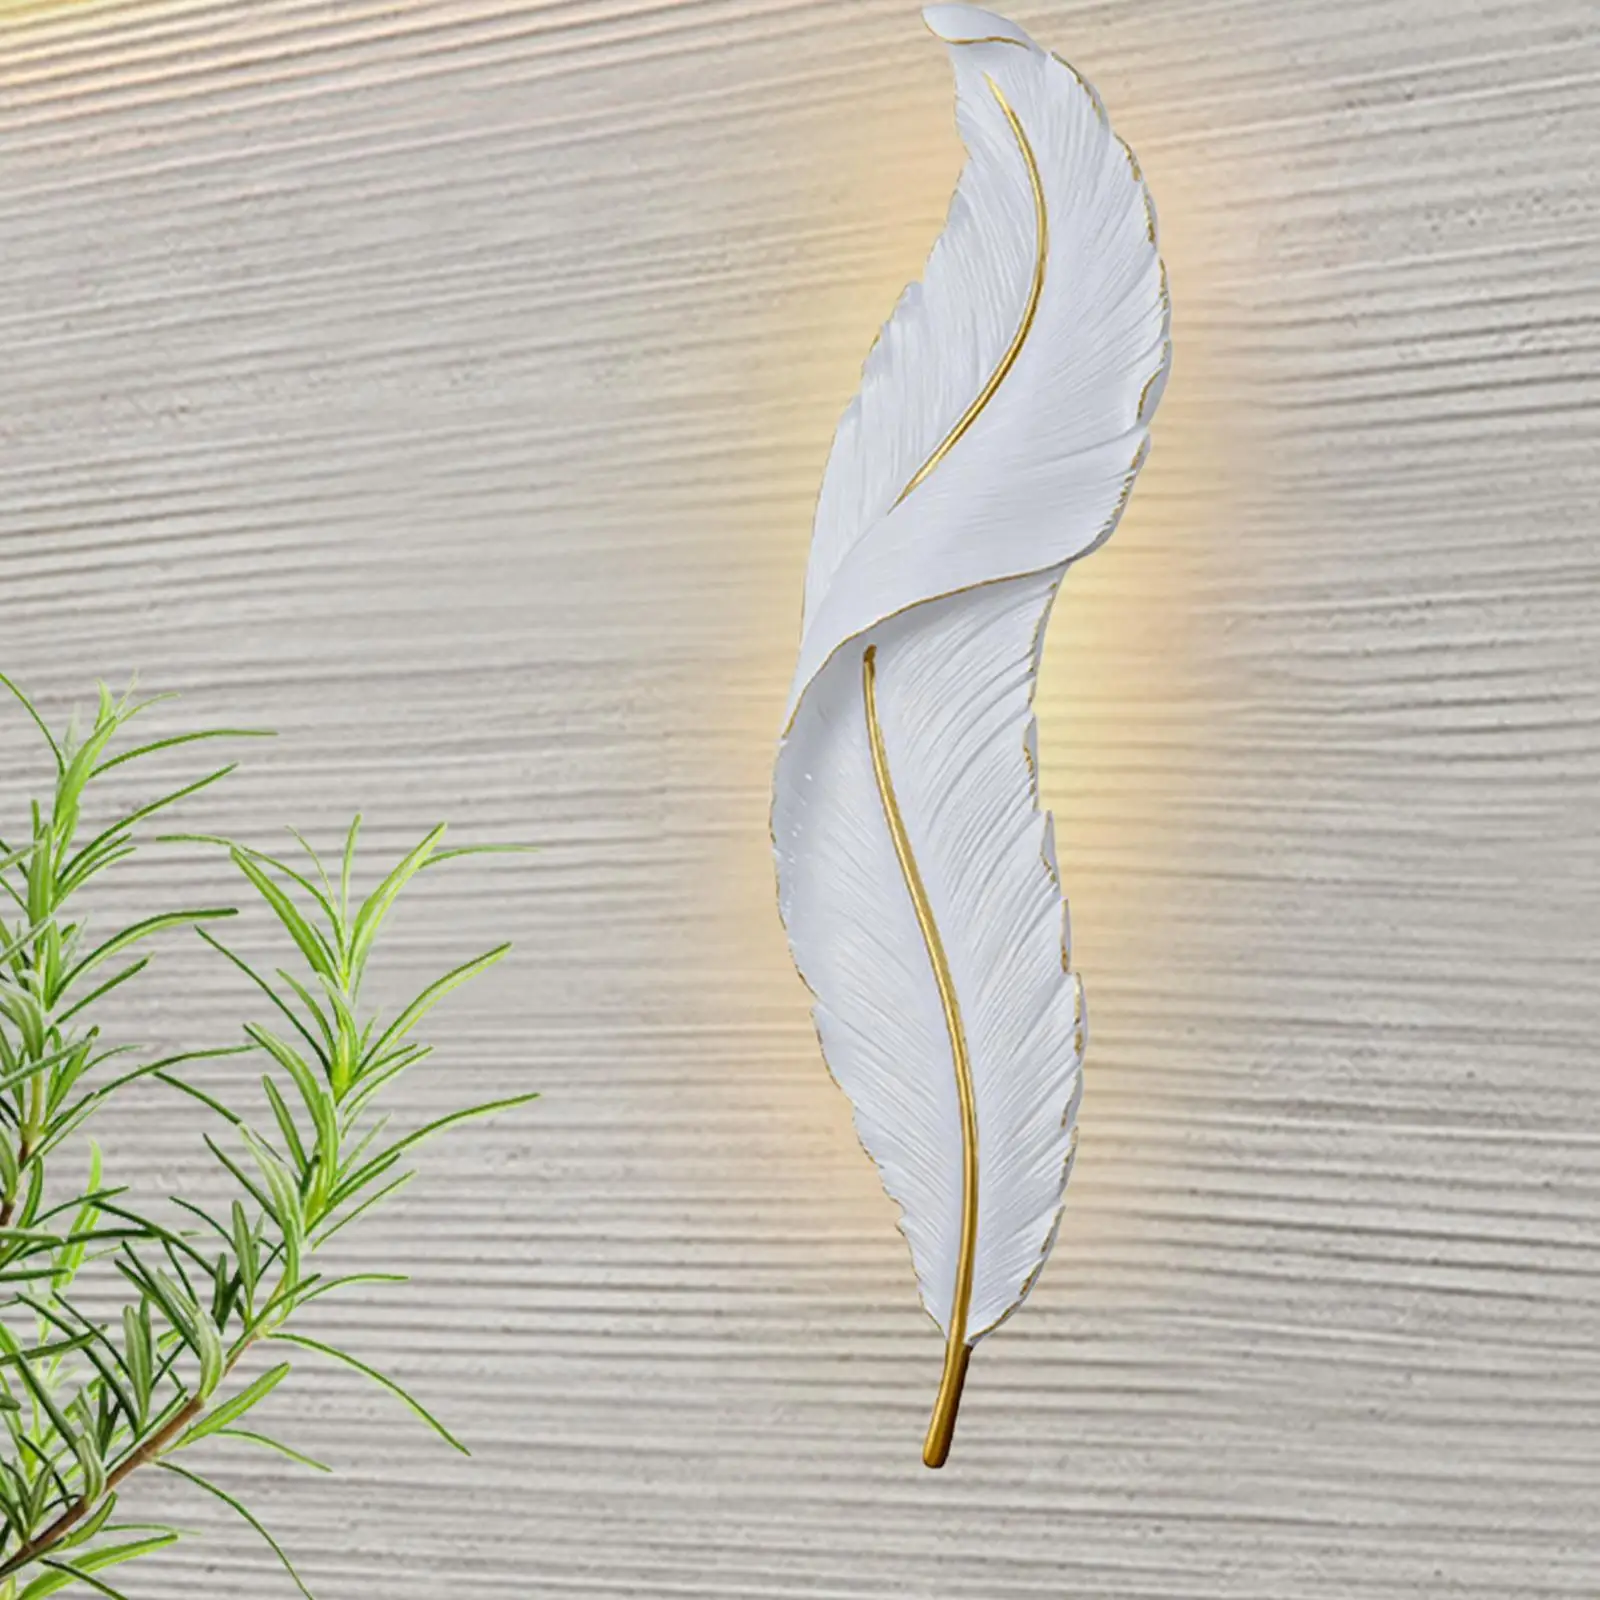 LED Wall Lamps Wall Lighting Fixture Lamps 3 Lighting Mode Bedside Wall Lamp for Hotel Dining Room Restaurant Farmhouse Cafe